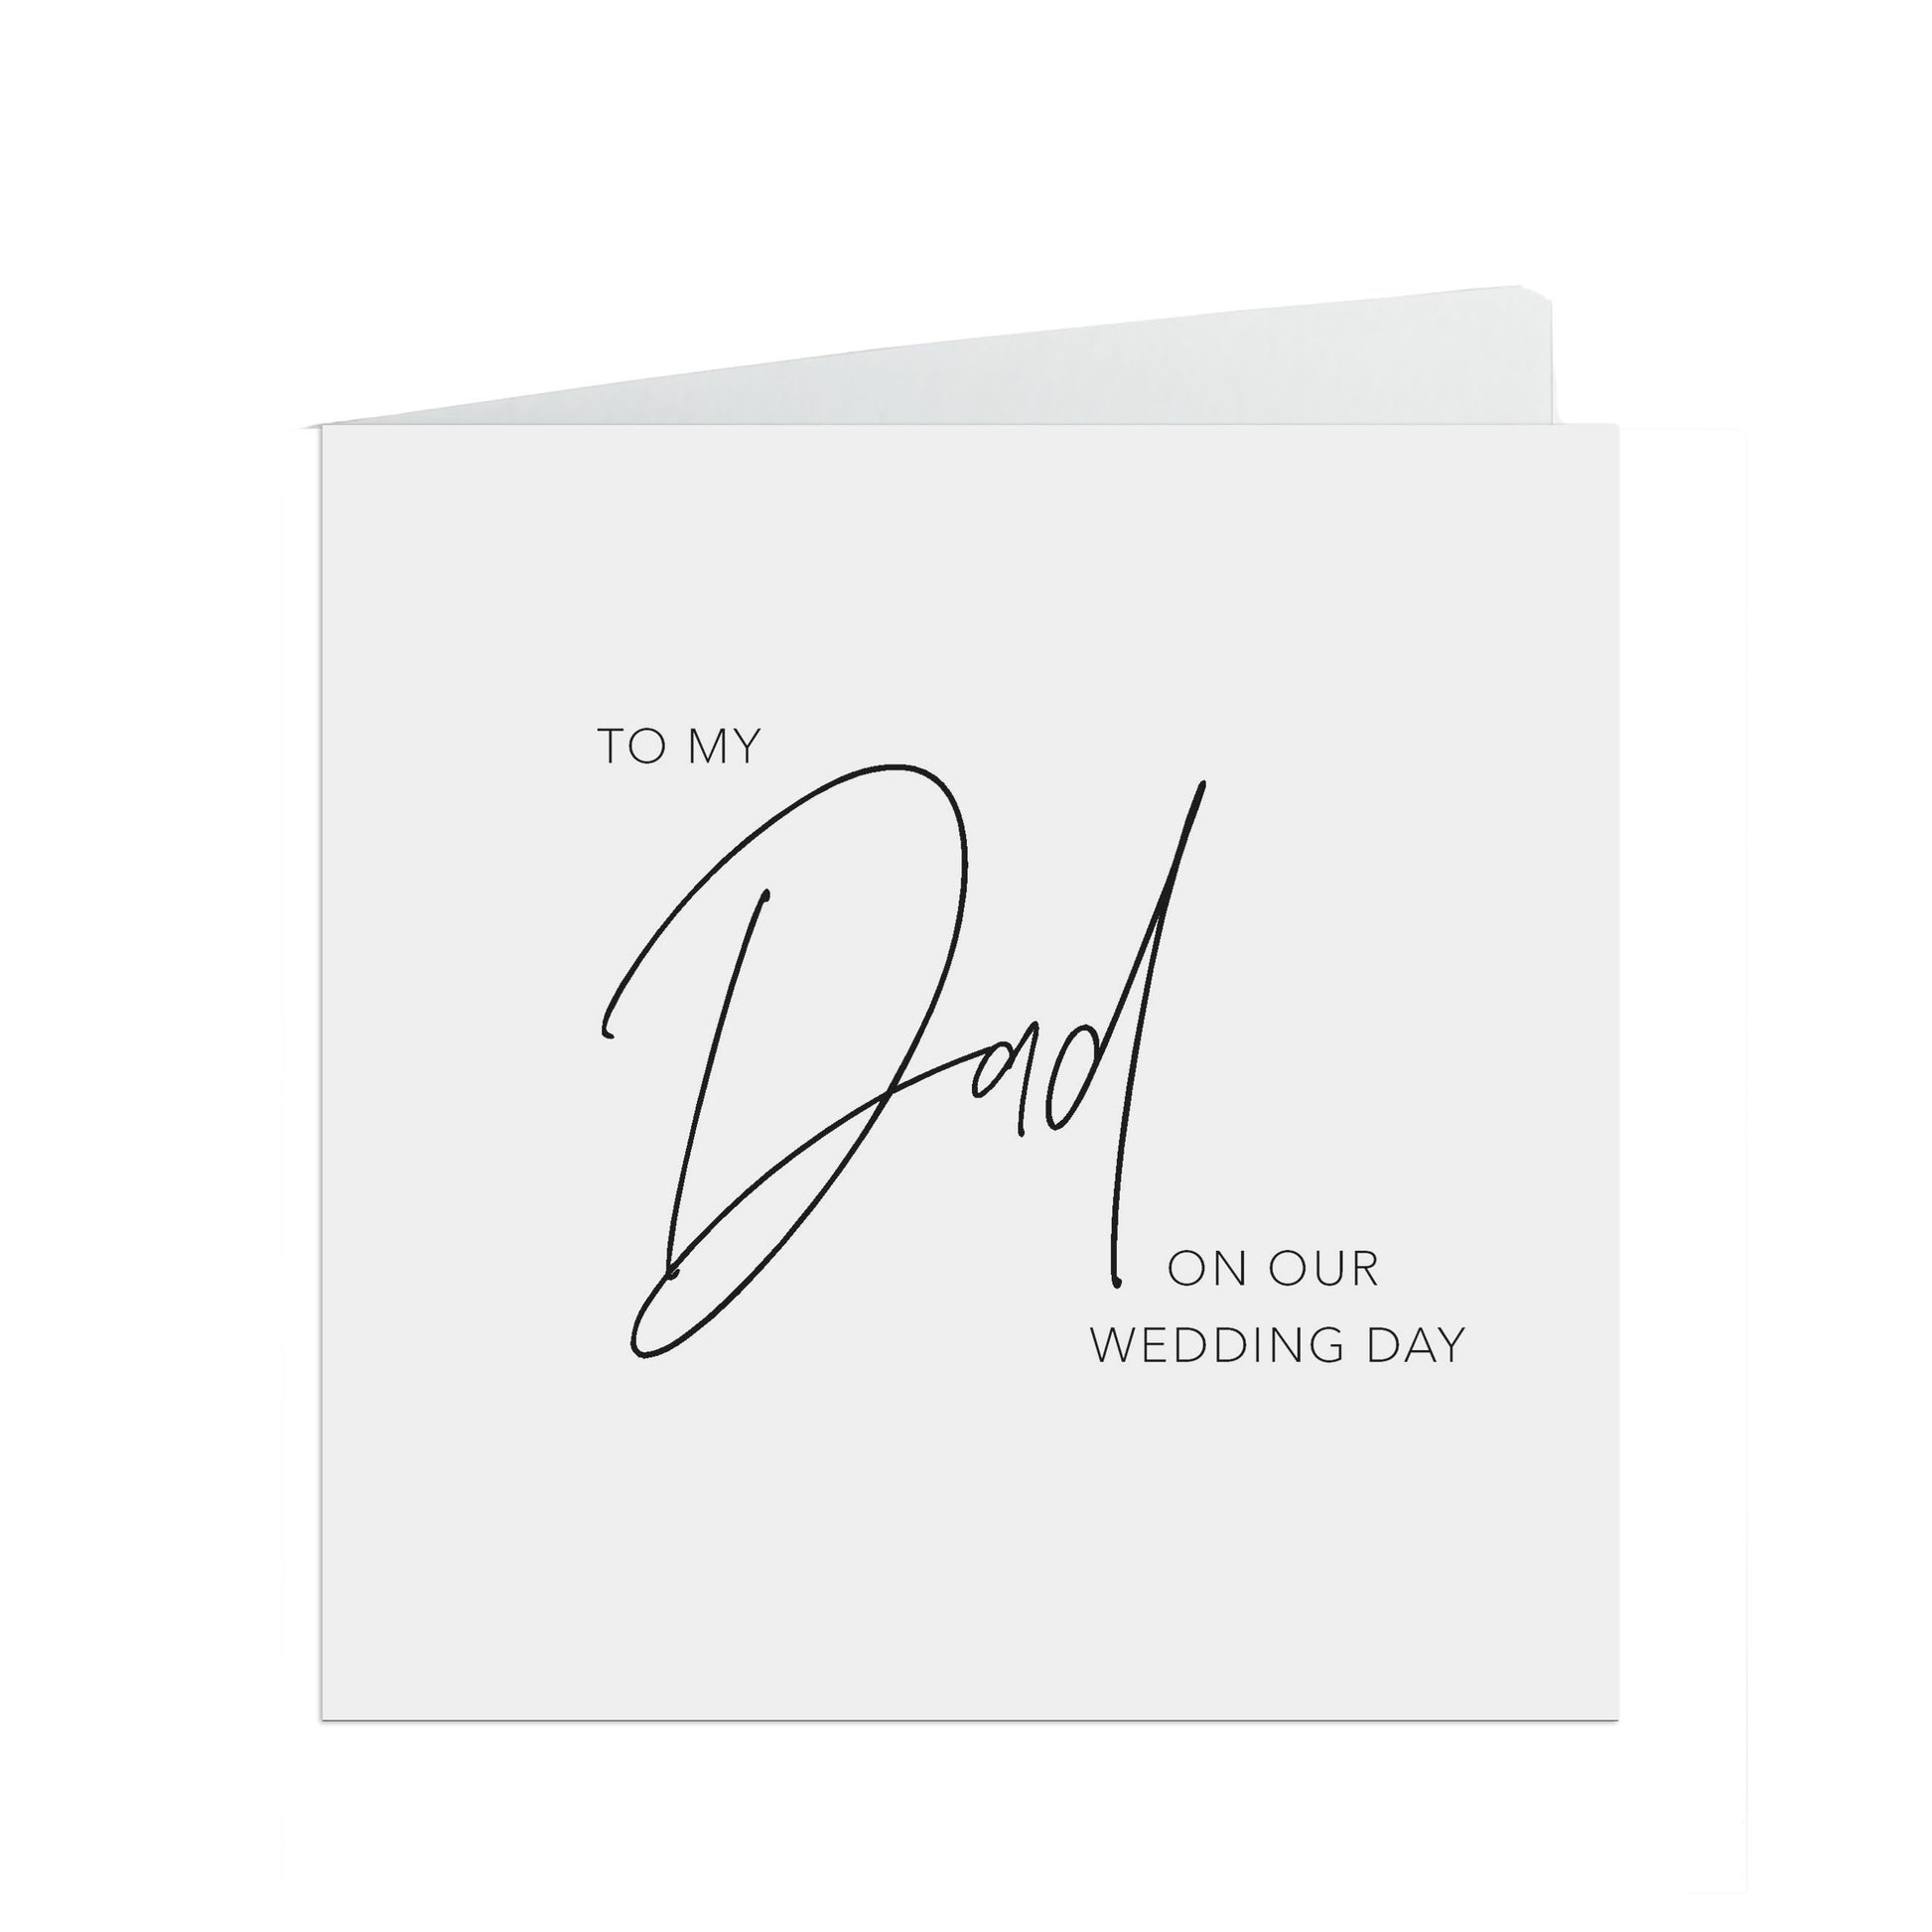 Dad On Our Wedding Day Card, Elegant Black & White Design, 6x6 Inches In Size With A White Envelope